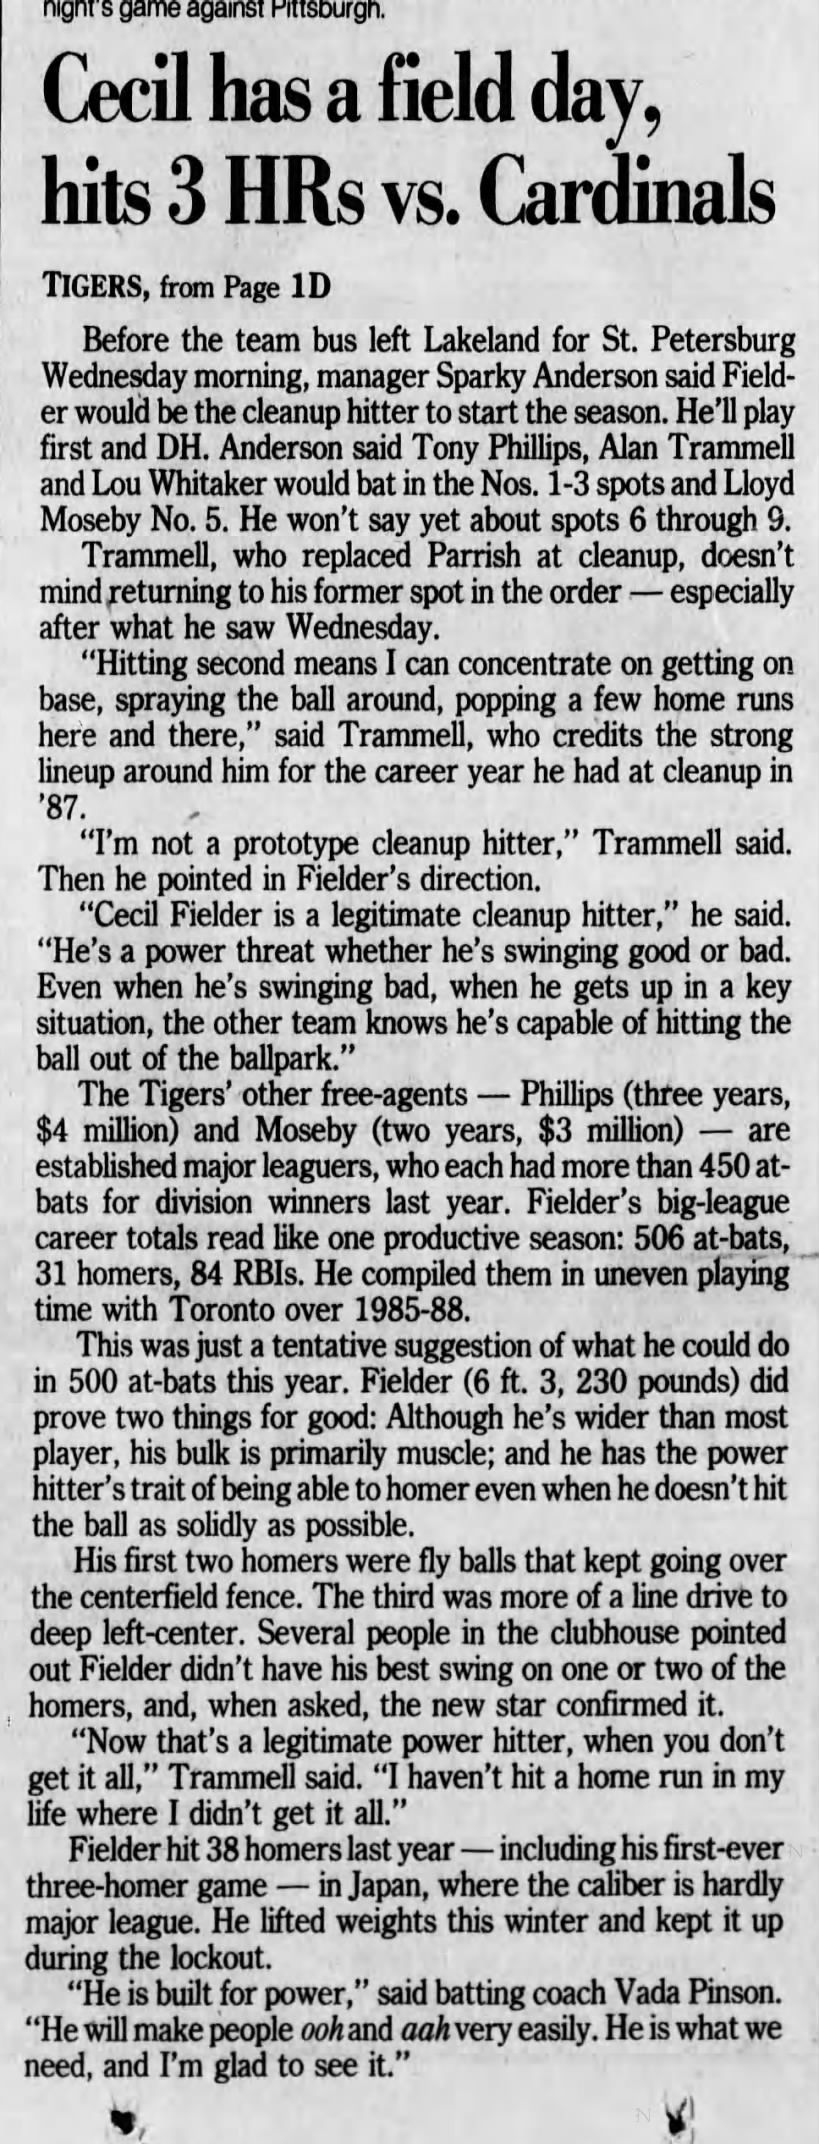 Thurs 3/29/90 3-HR Game (pg 2 of 2) - Sparky/cleanup